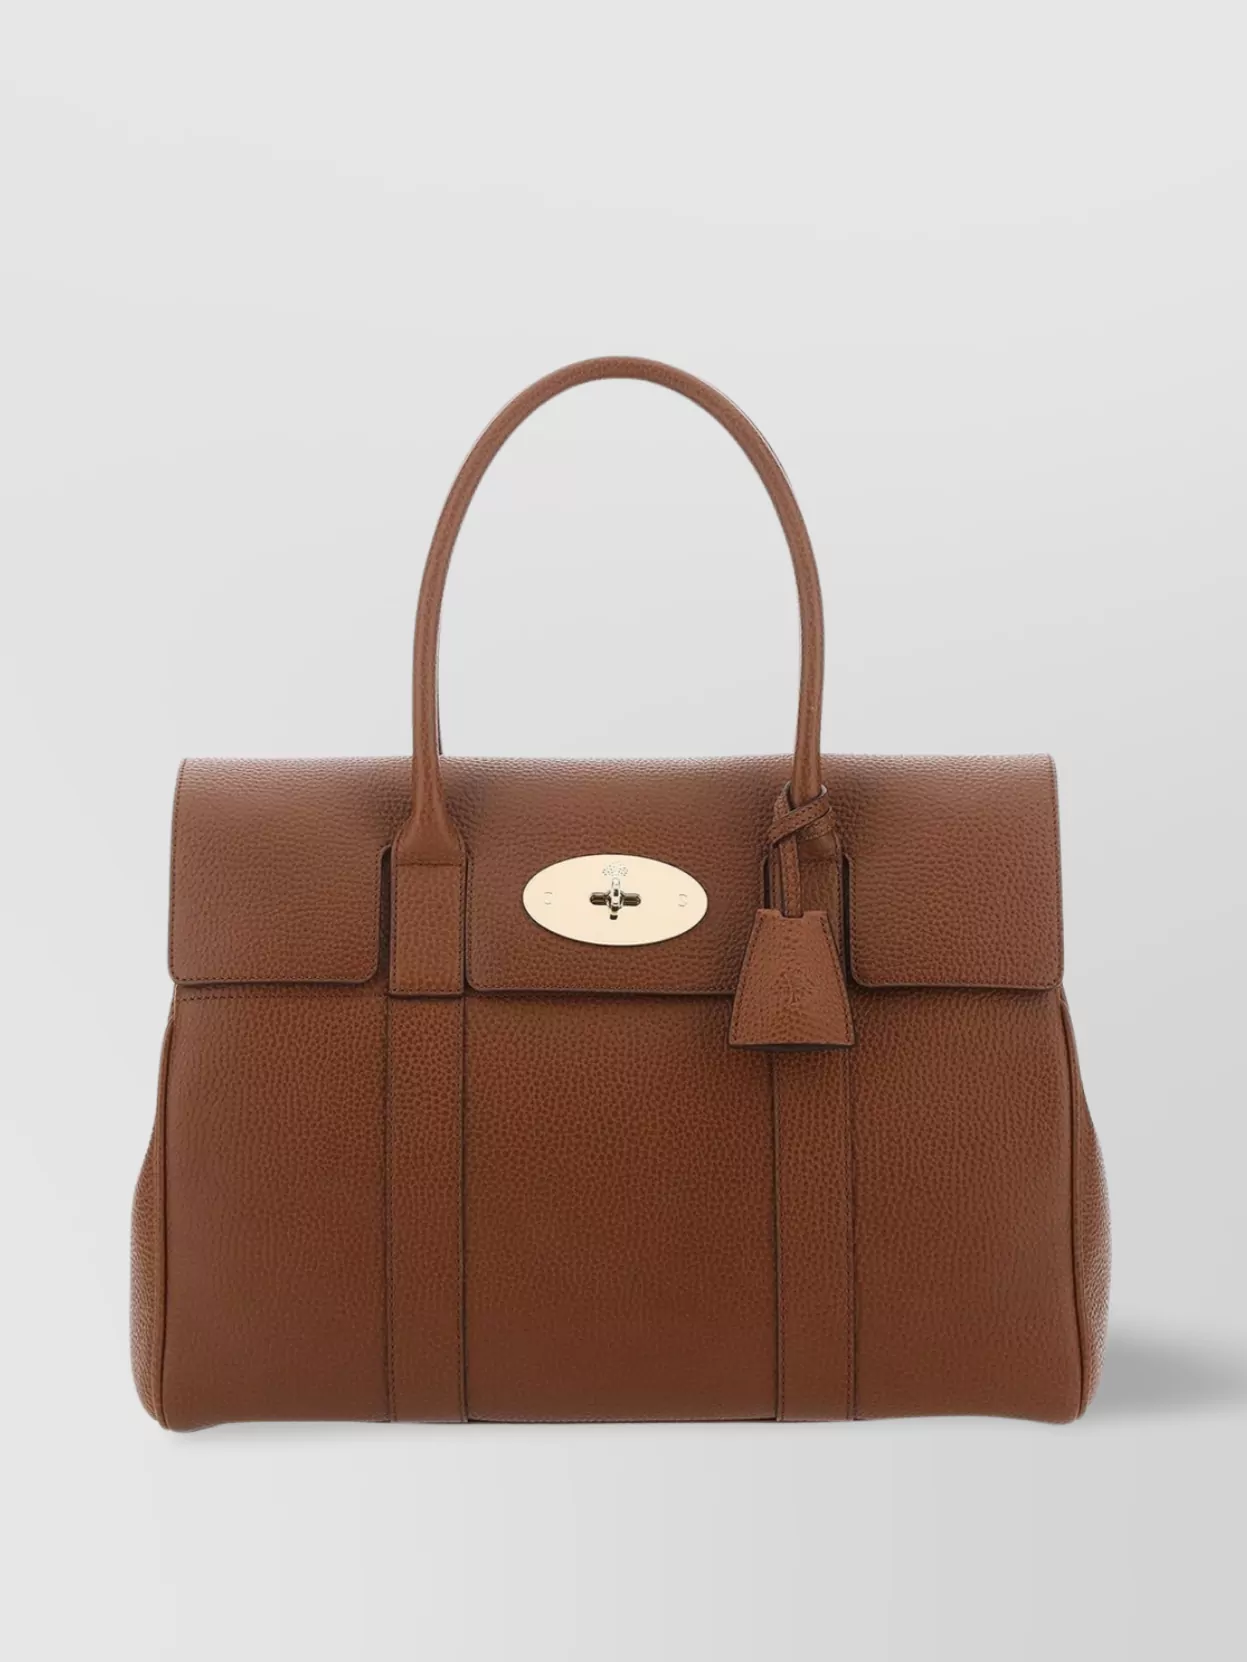 Mulberry Handbag With Structured Silhouette And Top Handle In Brown